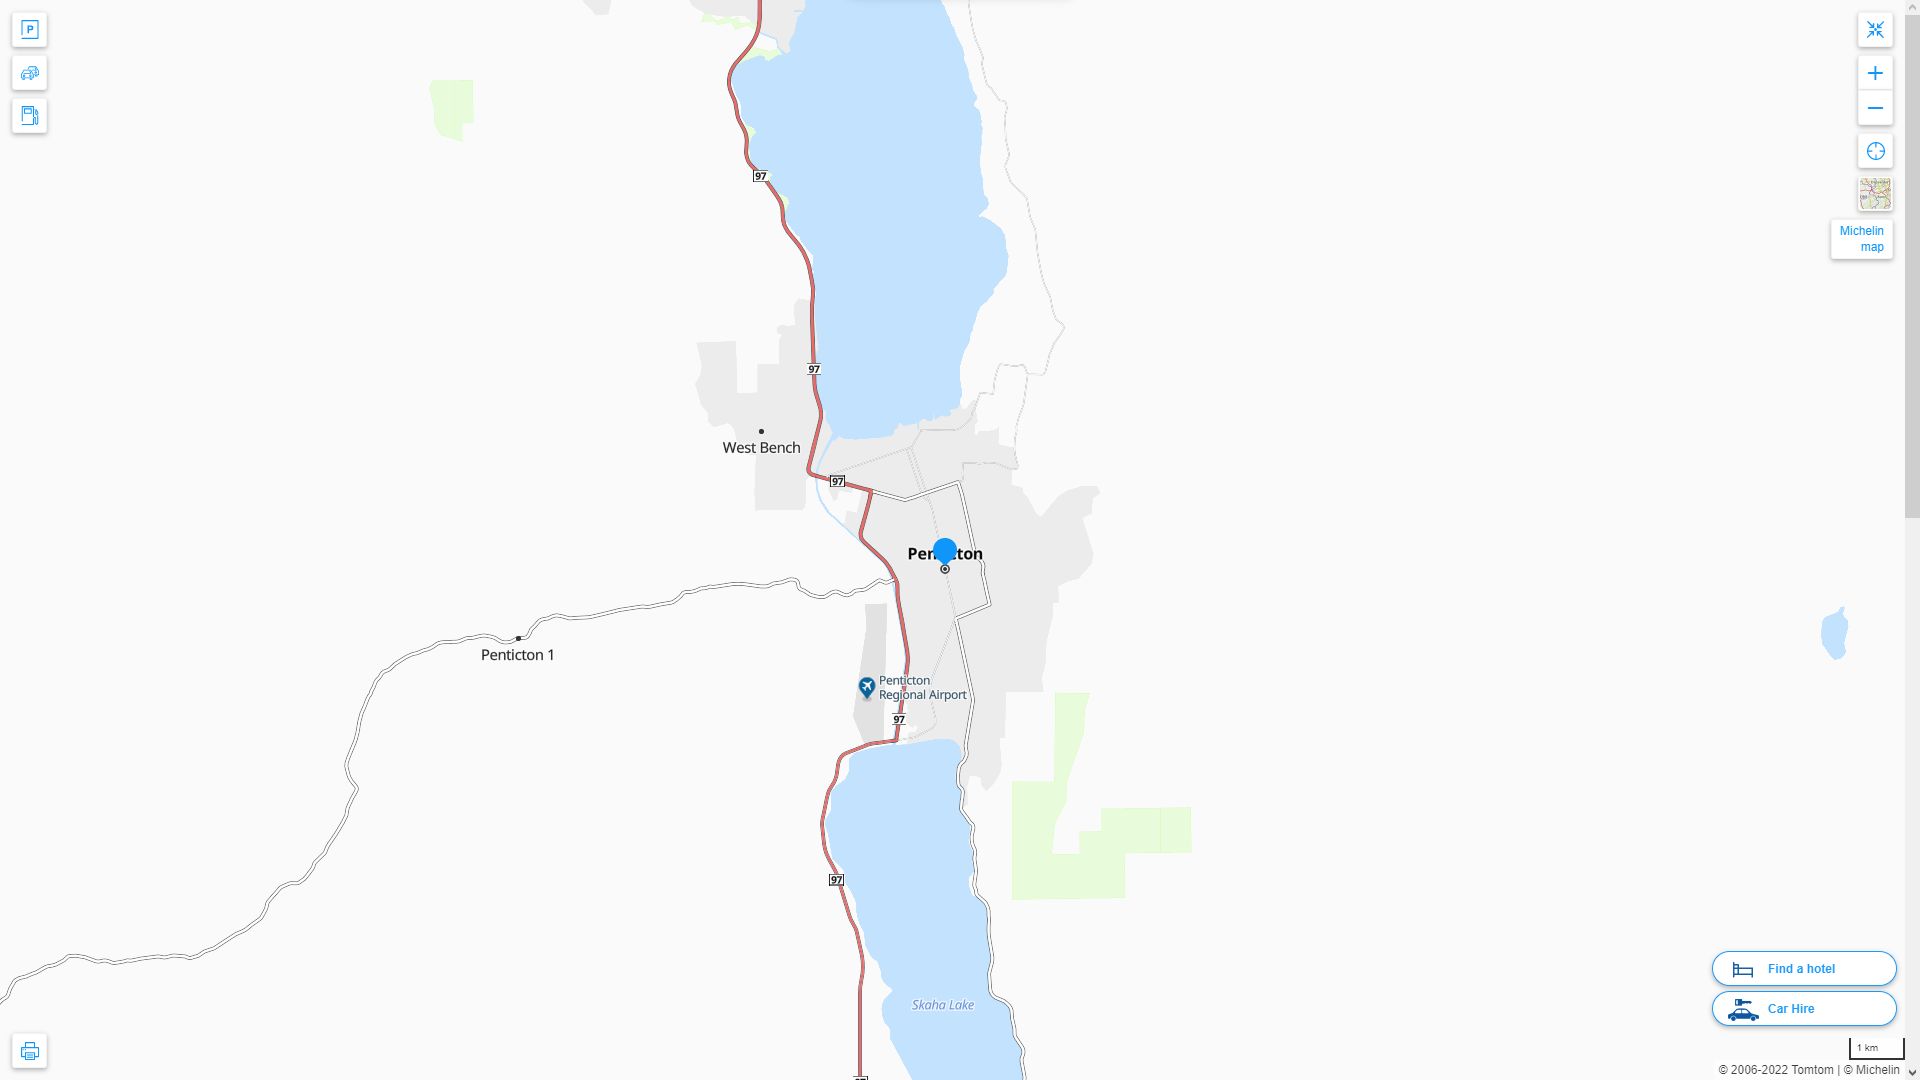 Penticton Highway and Road Map